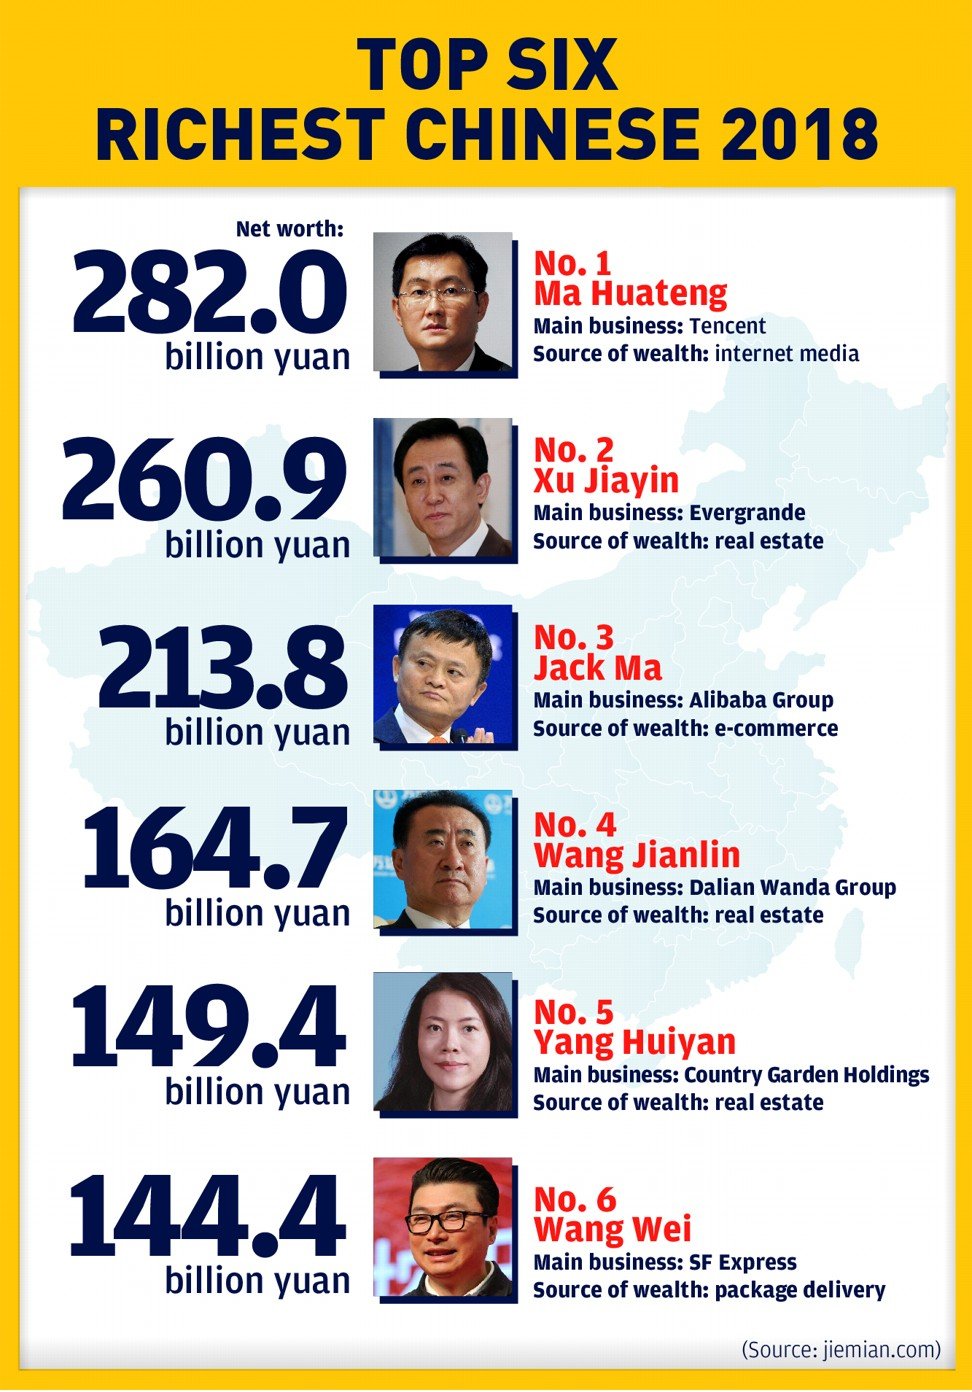 China’s six wealthiest billionaires, according to the list compiled by Jiemian.com.